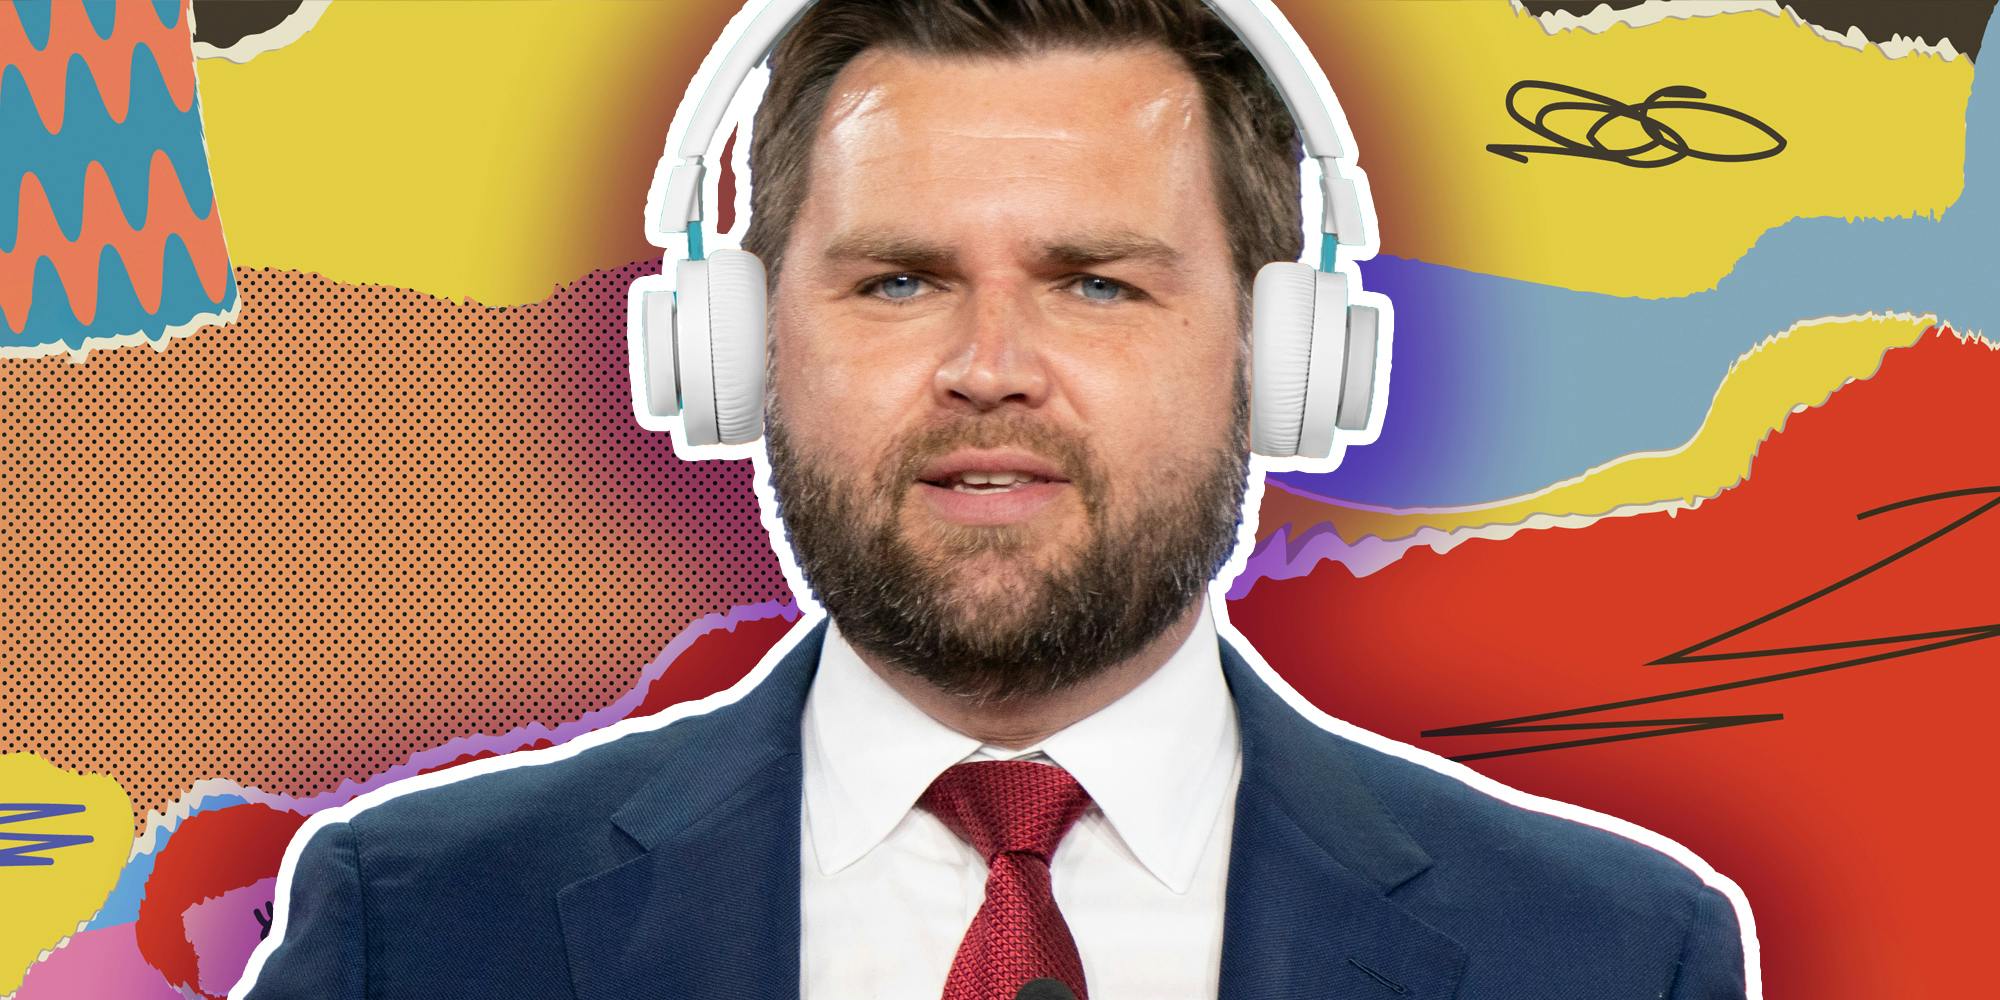 J.D. Vance with headphones and abstract background